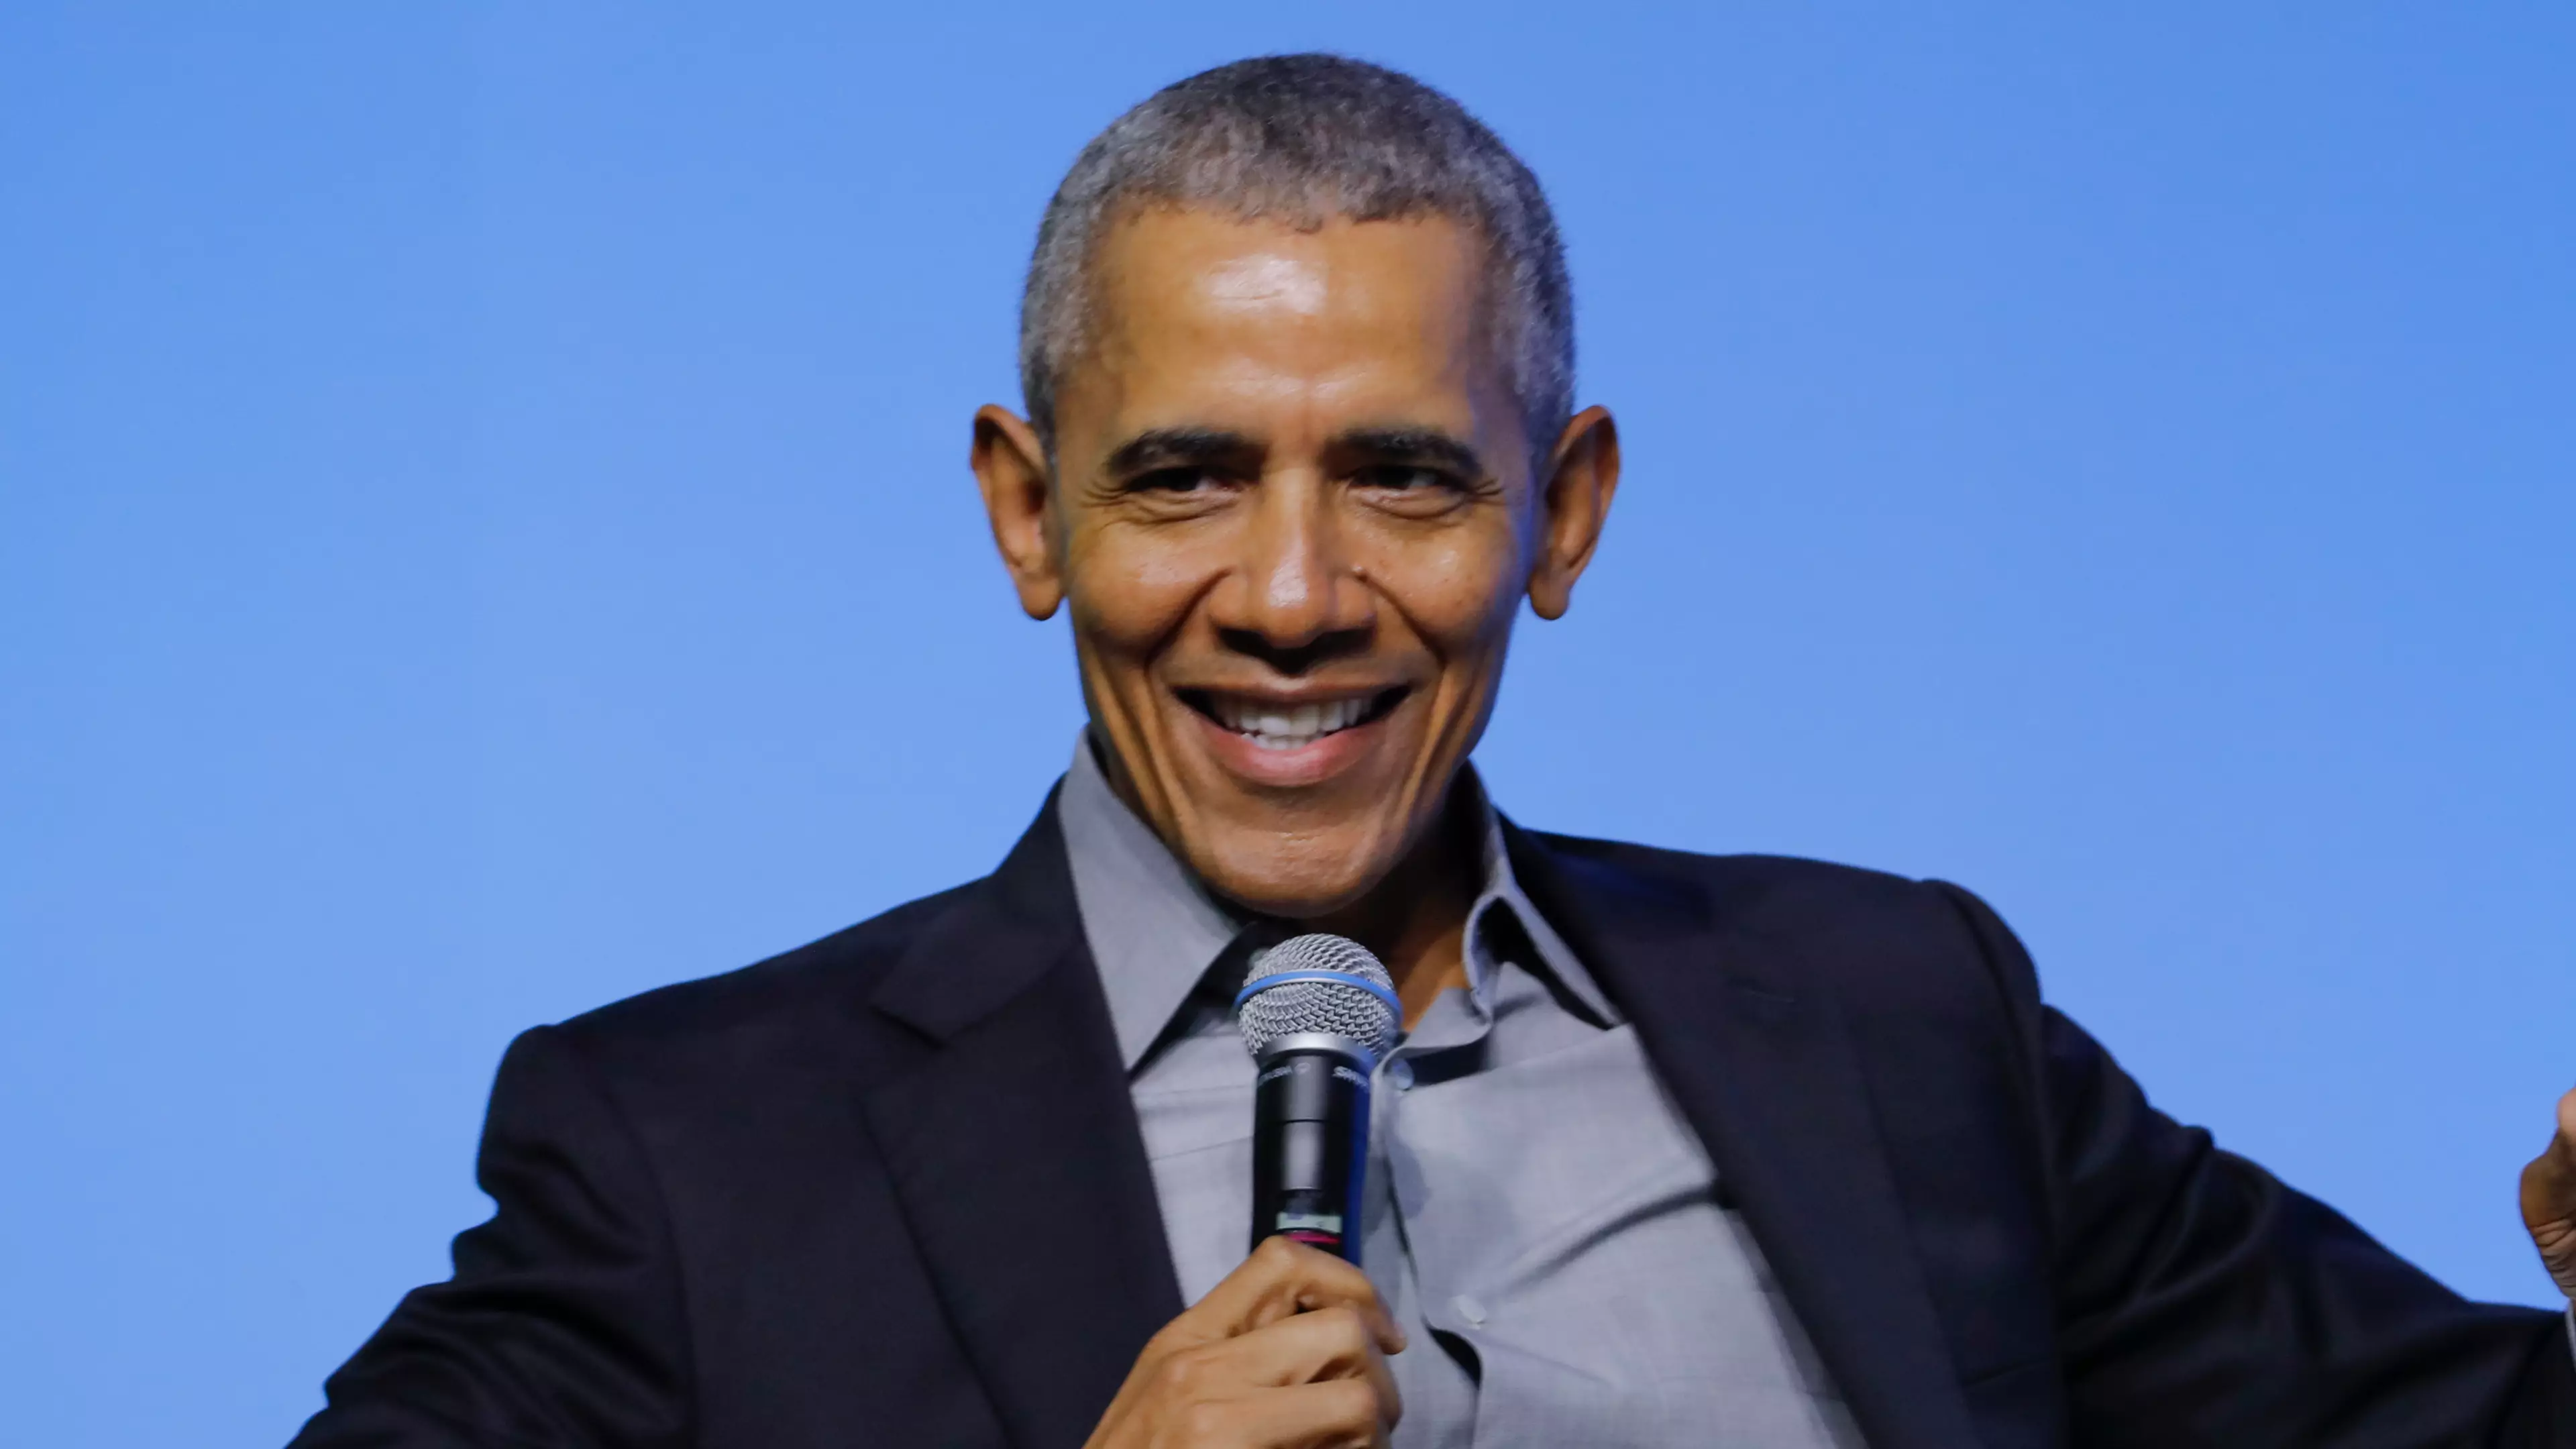 Barack Obama Says Women Are Indisputably Better Than Men